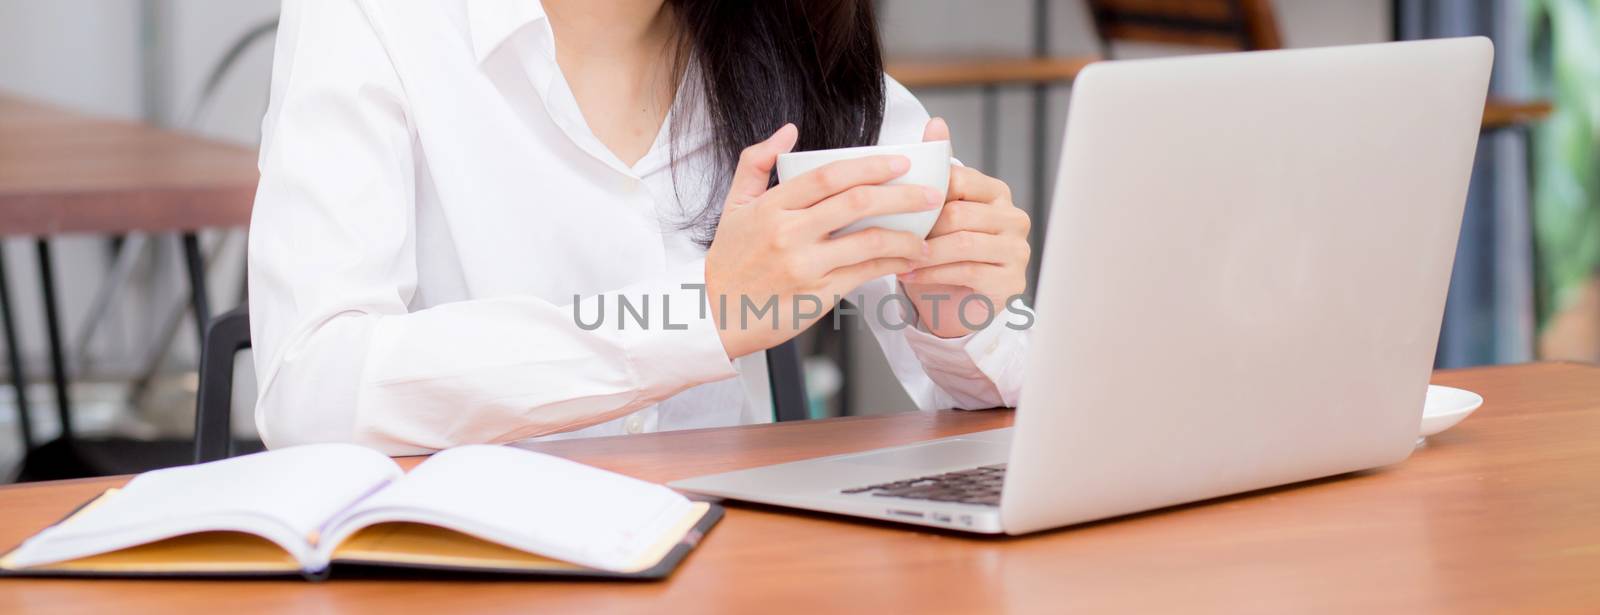 closeup banner website asian young woman working online on lapto by nnudoo